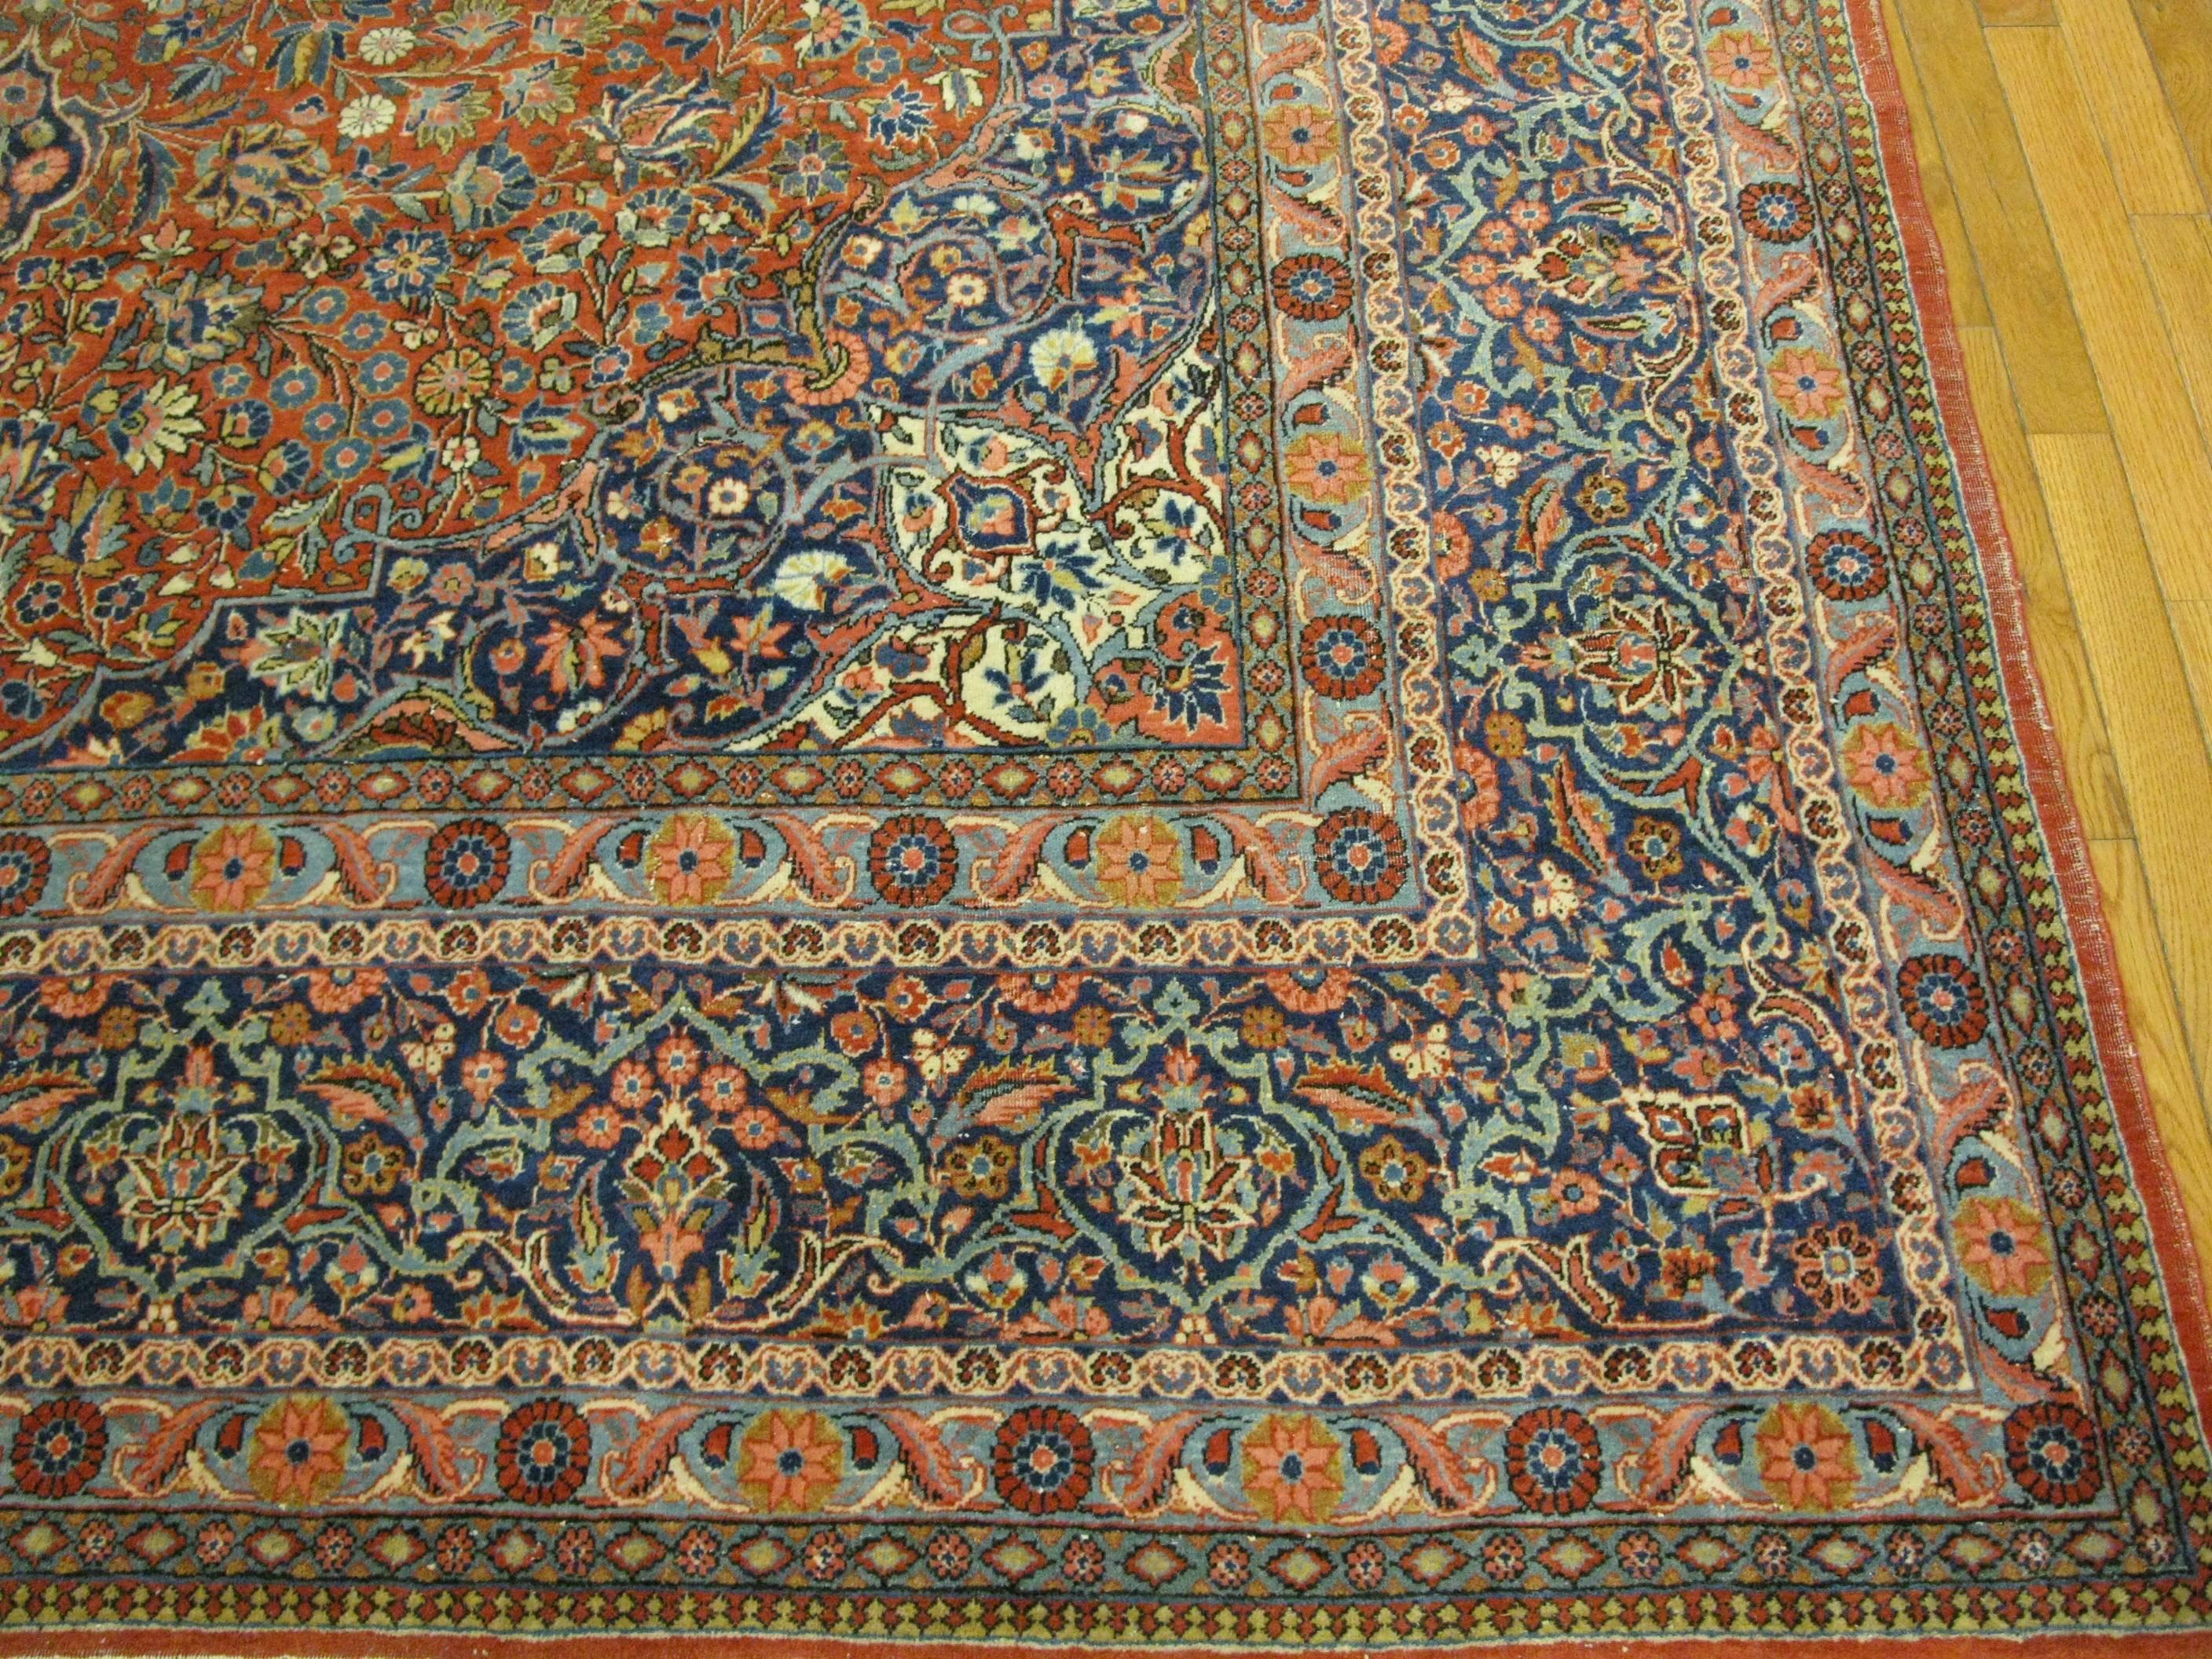 Antique Room Size Persian Kashan Rug In Excellent Condition For Sale In Atlanta, GA